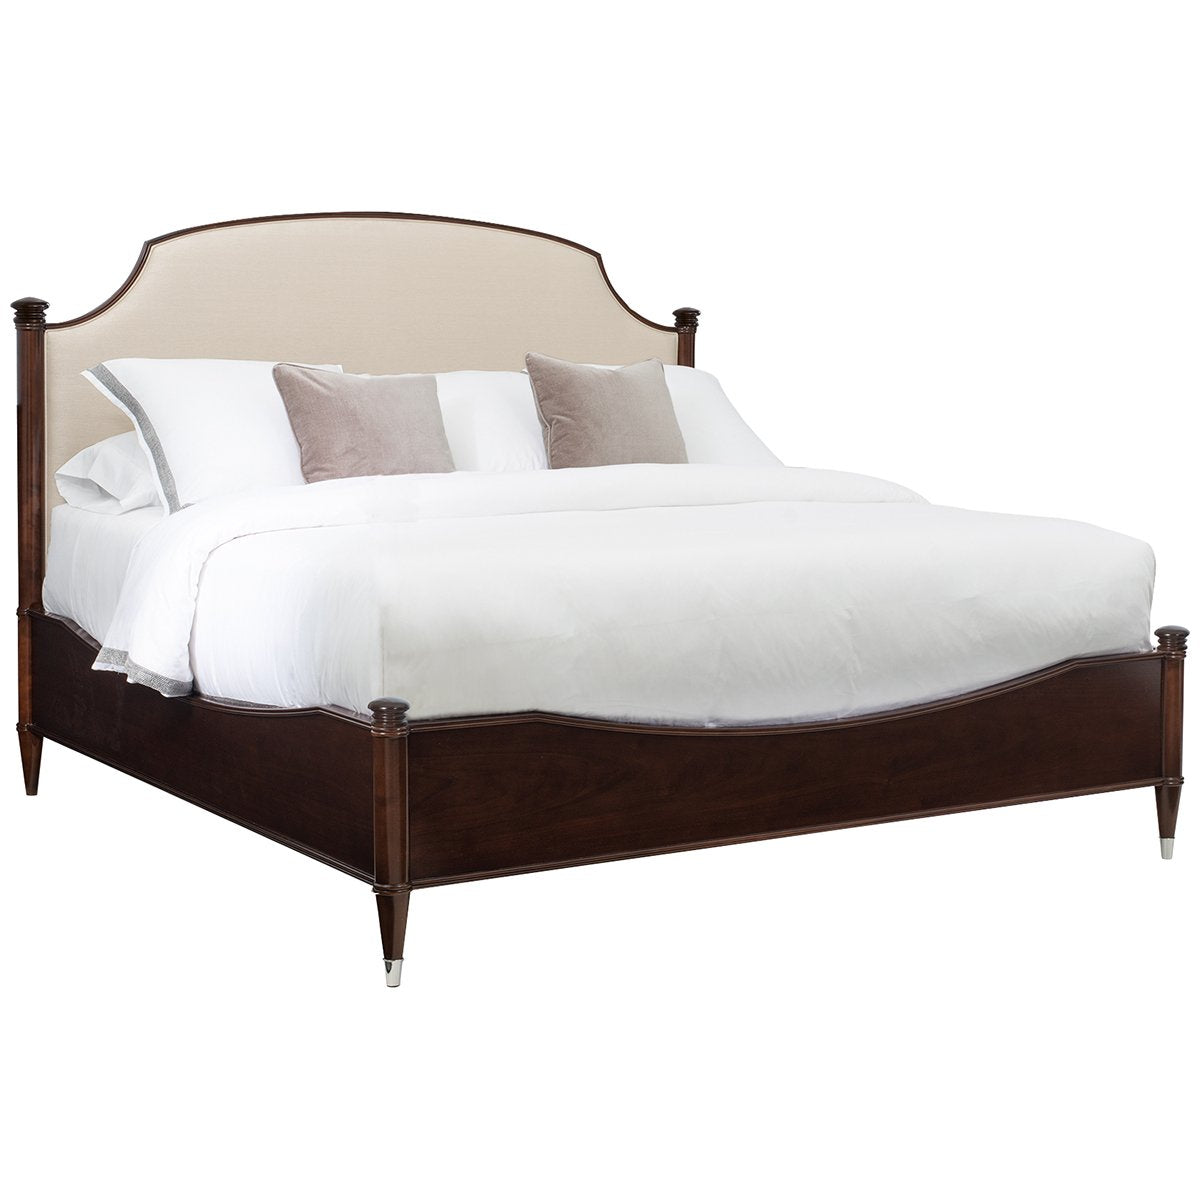 Caracole Classic Crown Jewel Bed